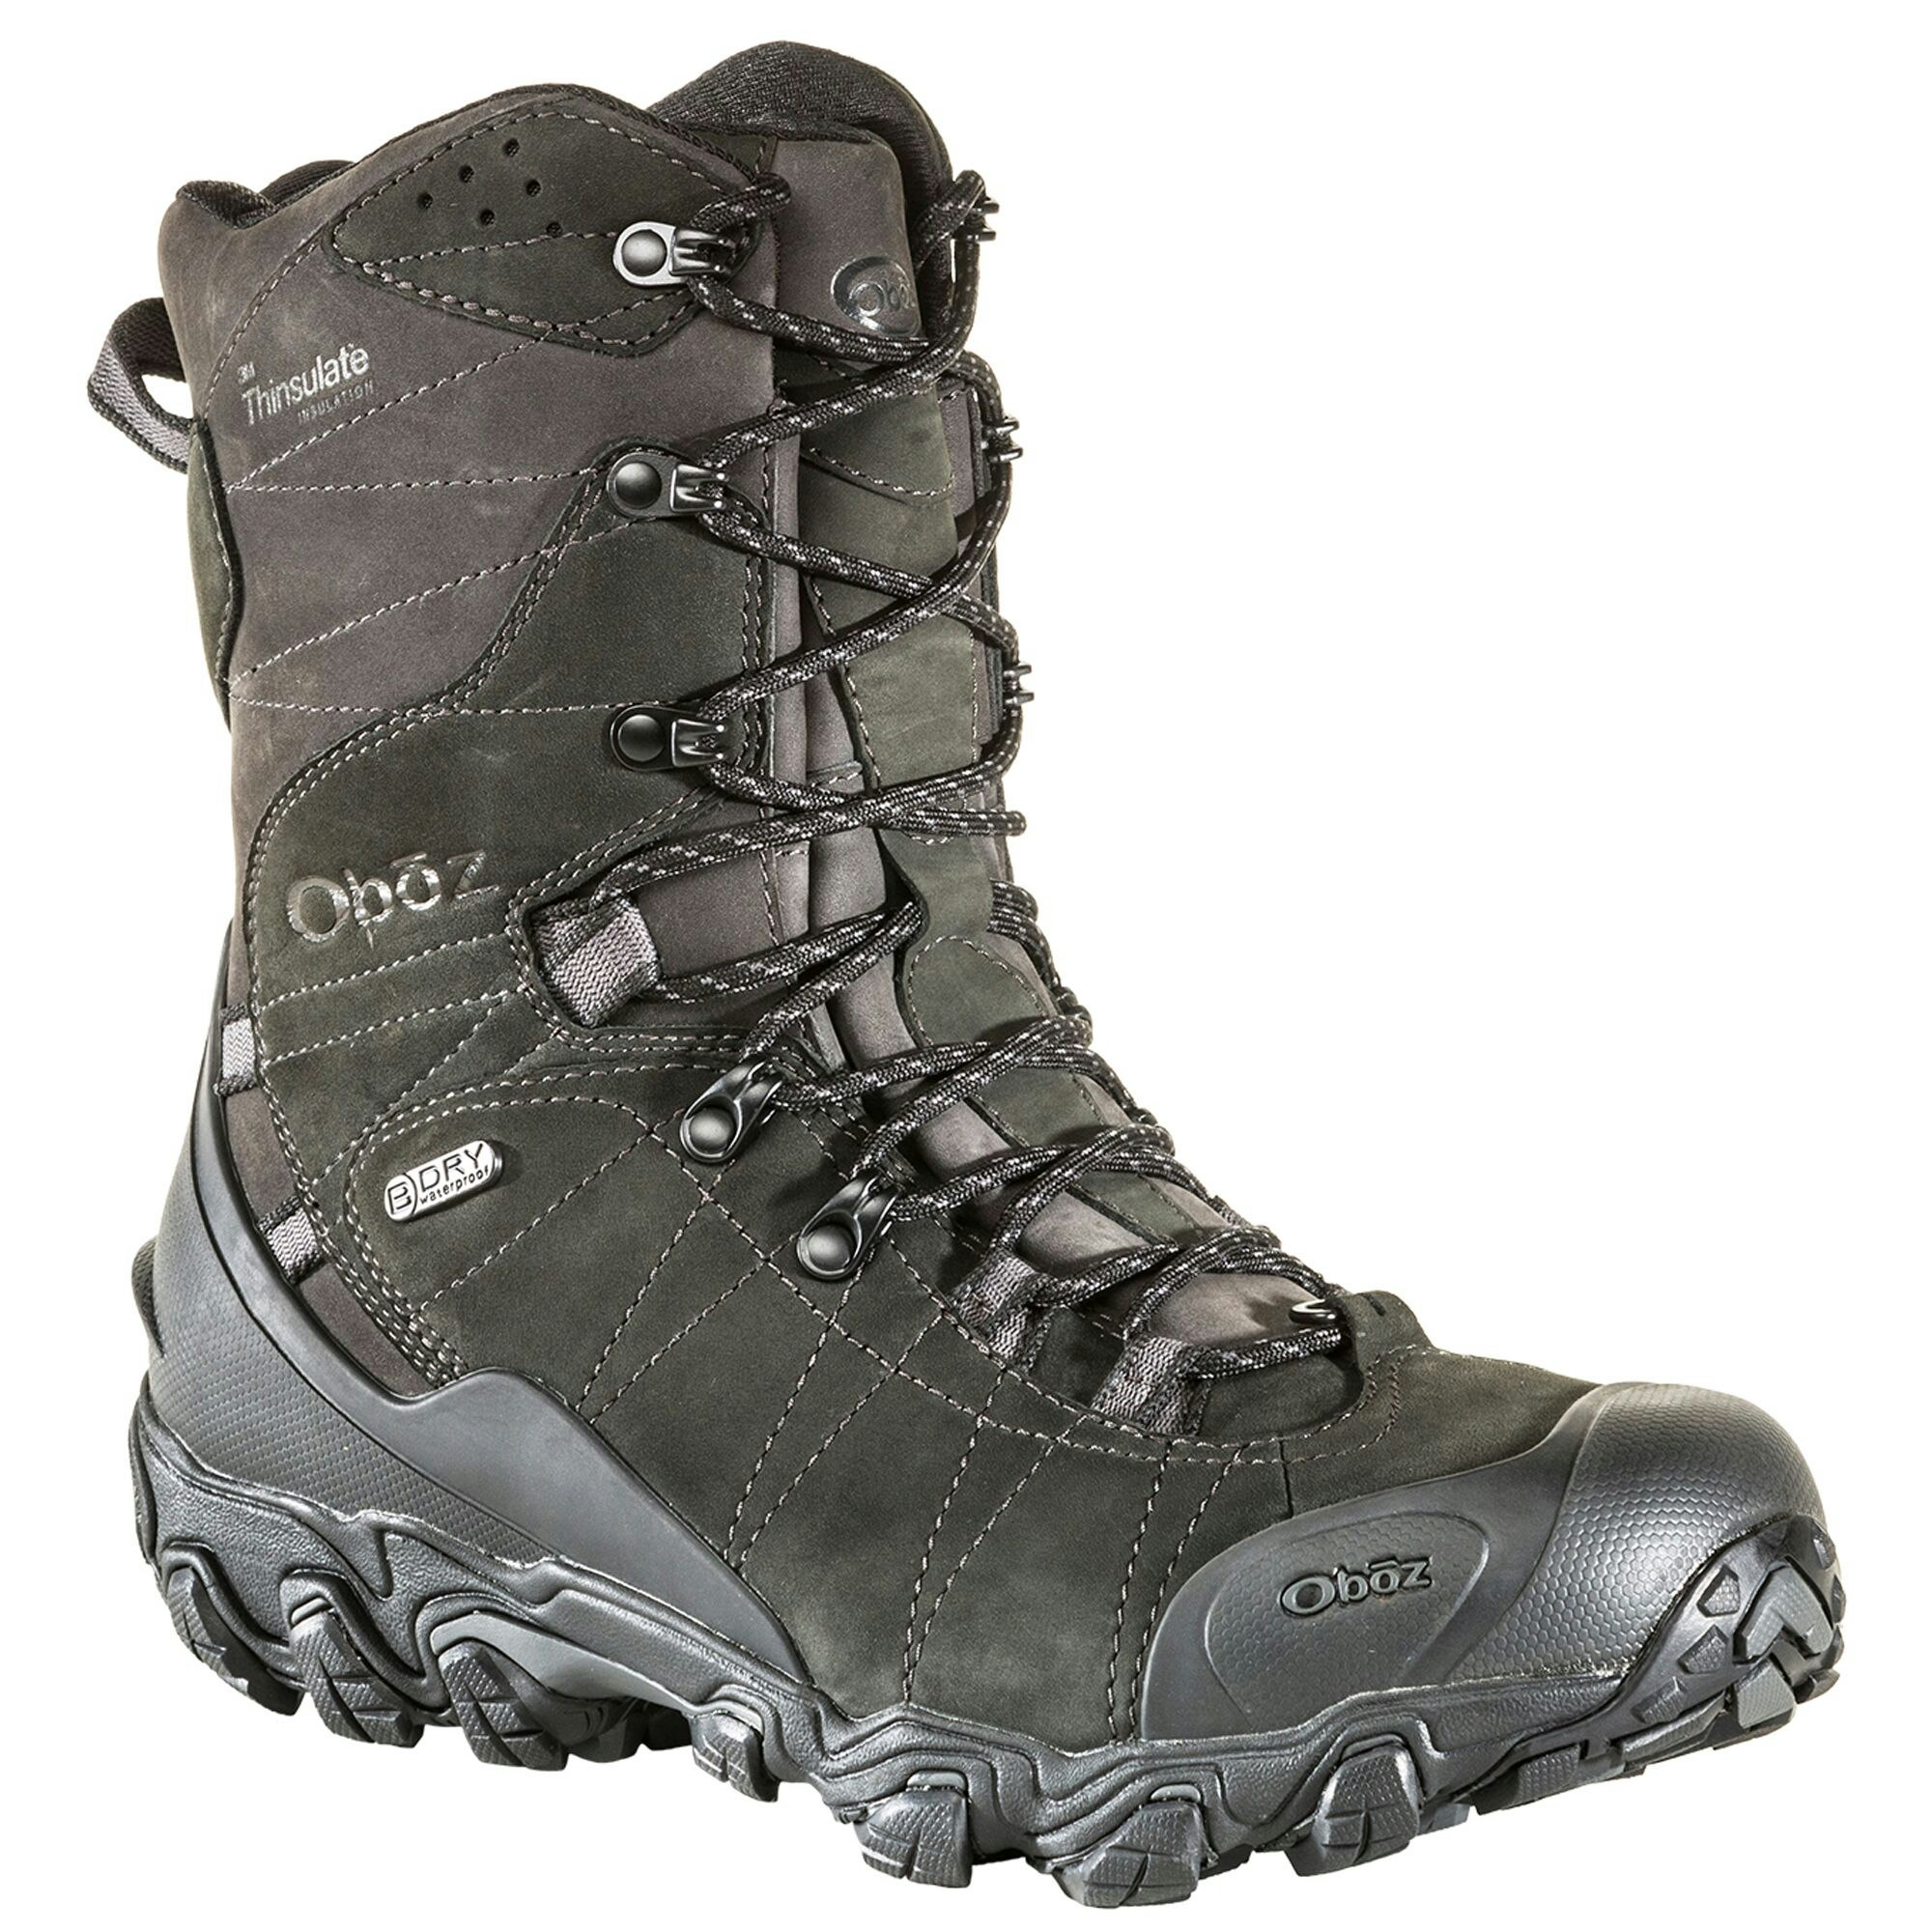 Bridger 10 inch B-DRY Insulated Boots